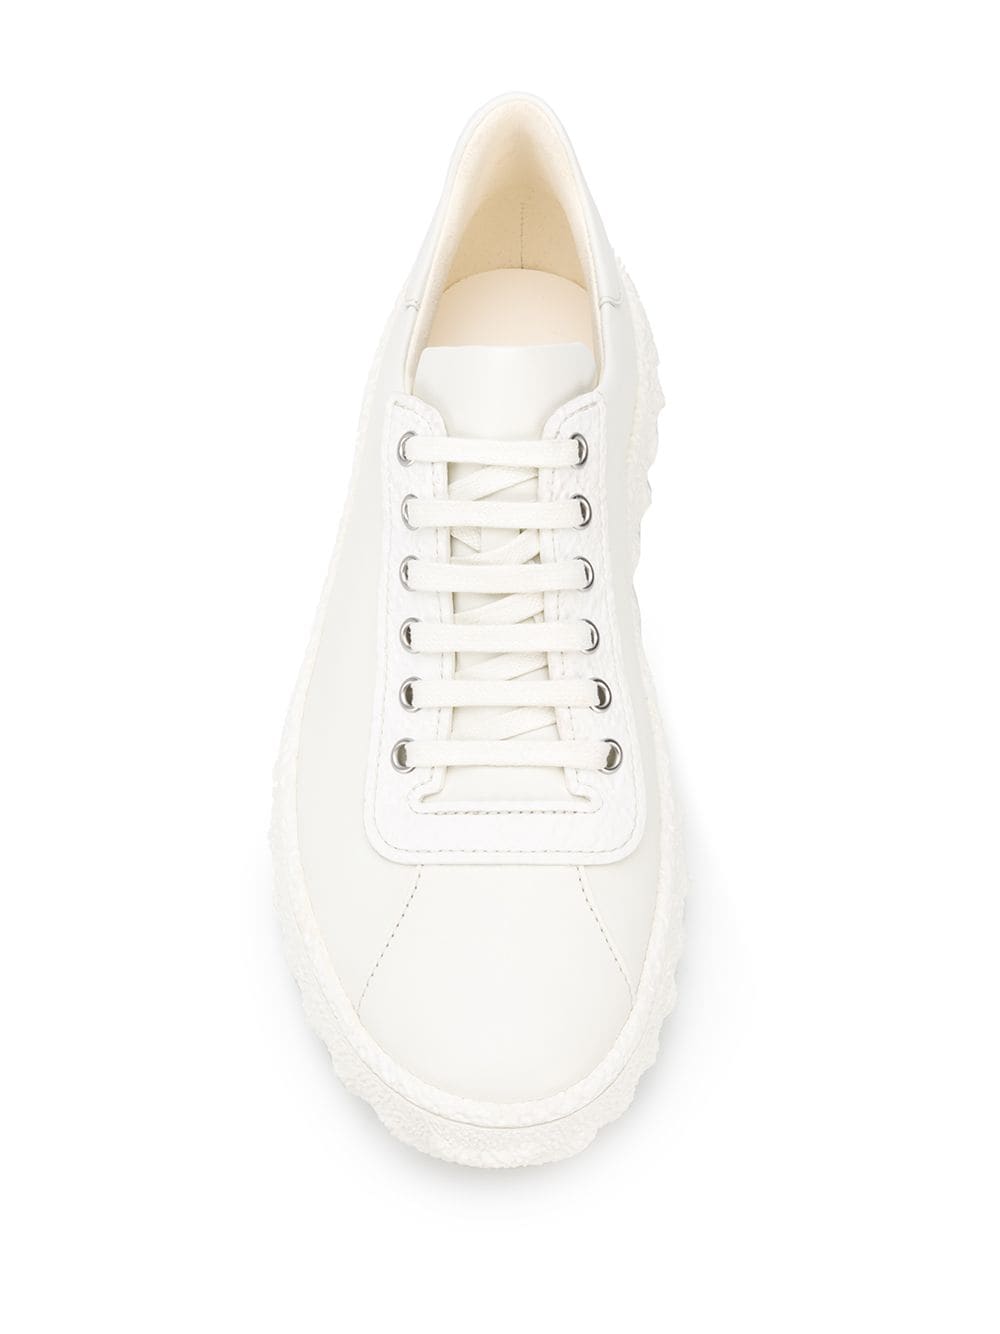 Shop CamperLab ridged sole low-top sneakers with Express Delivery ...